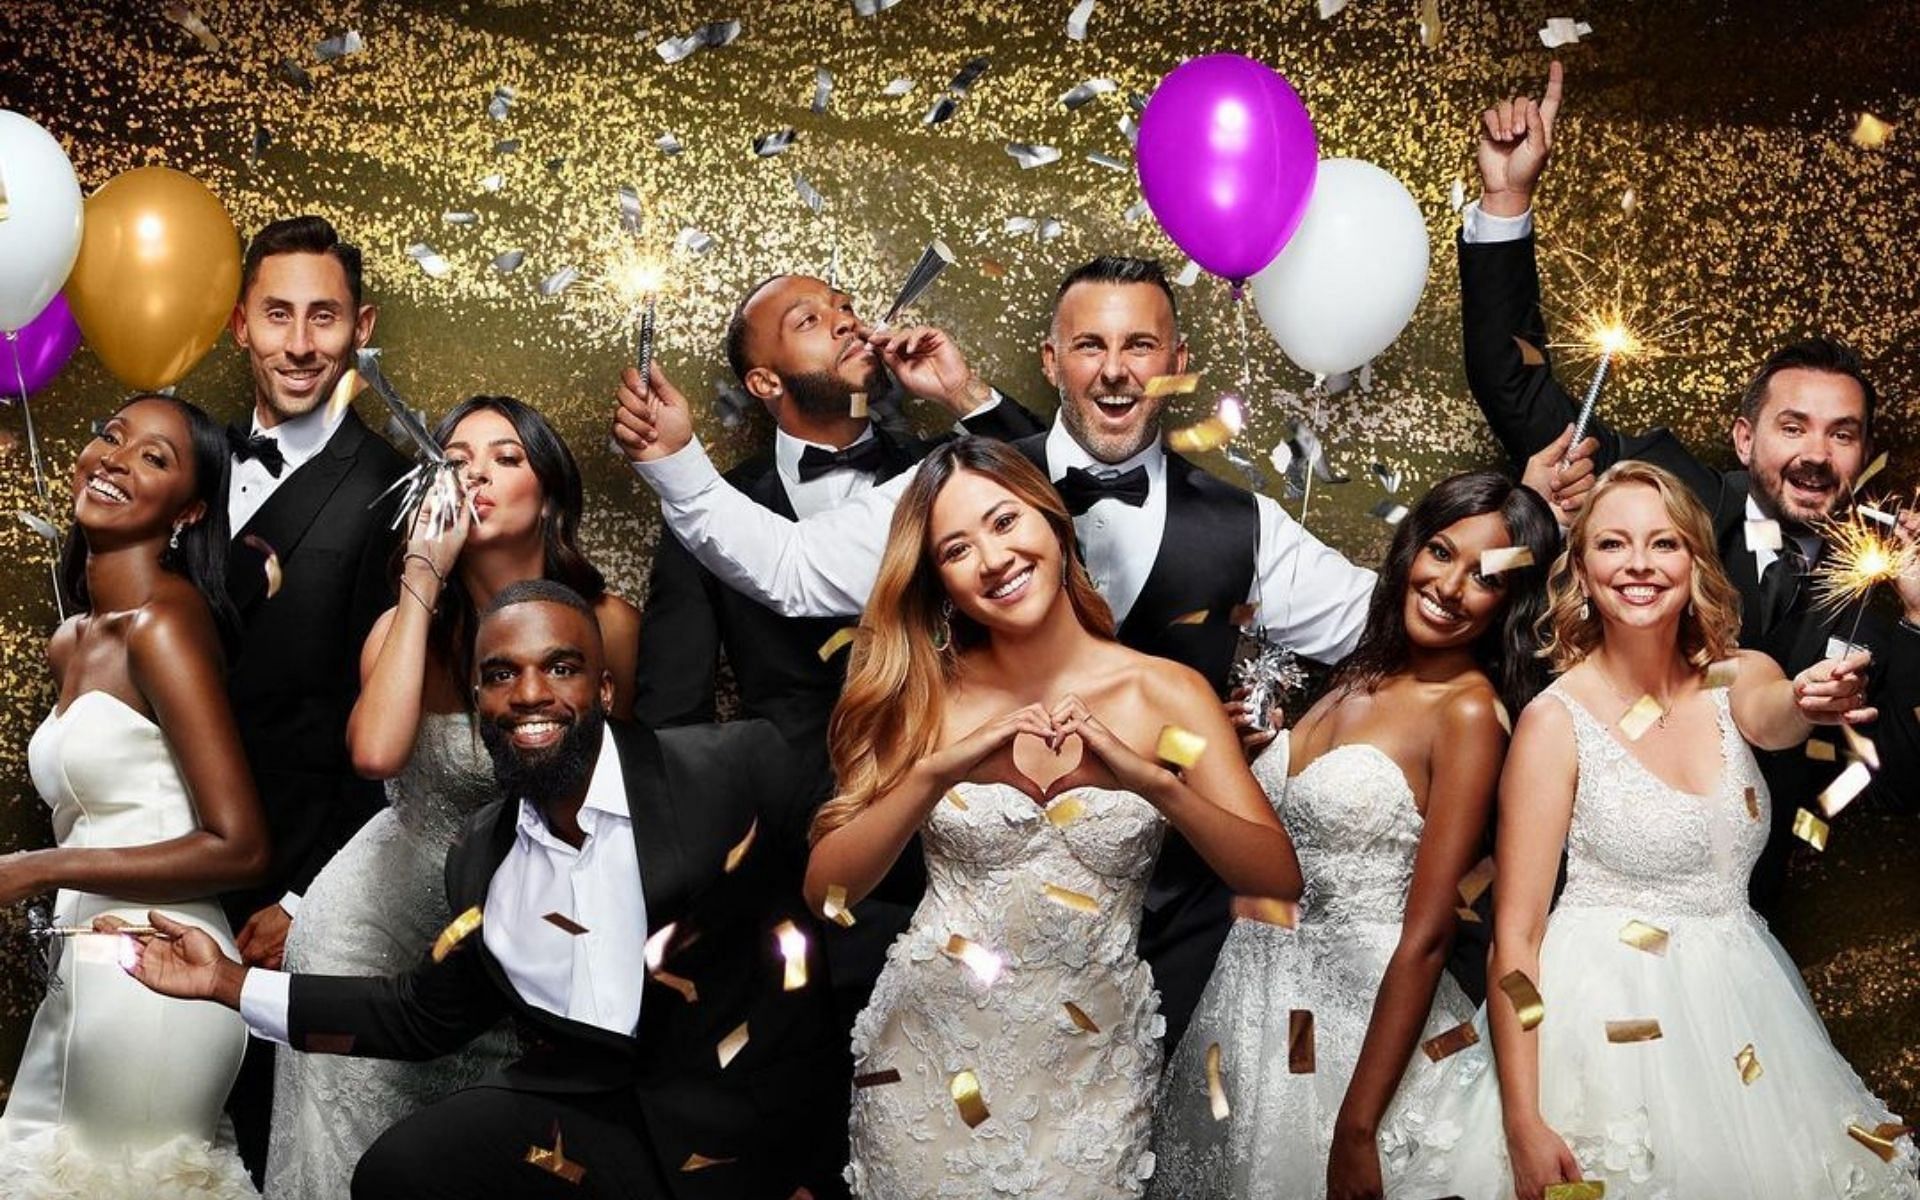 Married At First Sight couples discuss their relationships (Image via mafslifetime/Instagram)